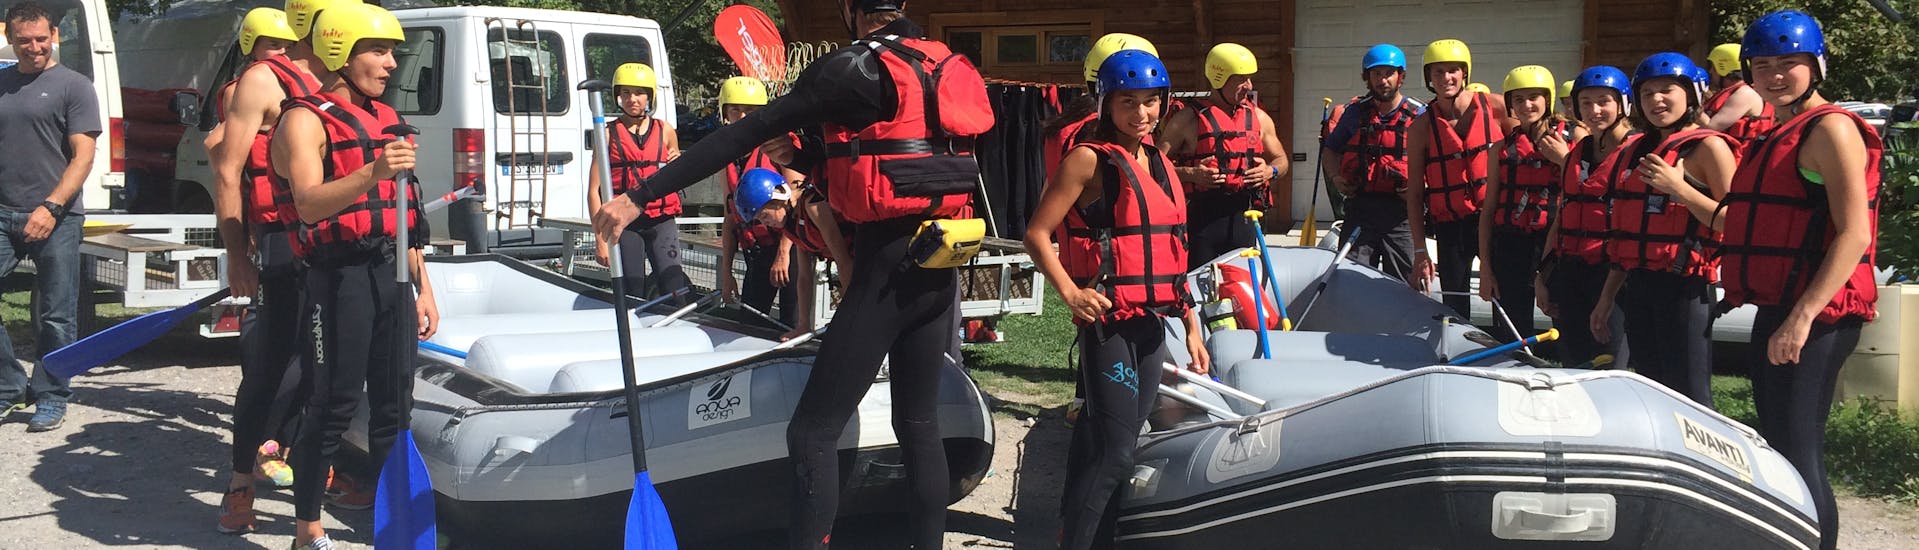 A group is waiting for their Rafting activity with Ecrins Eaux Vives. 